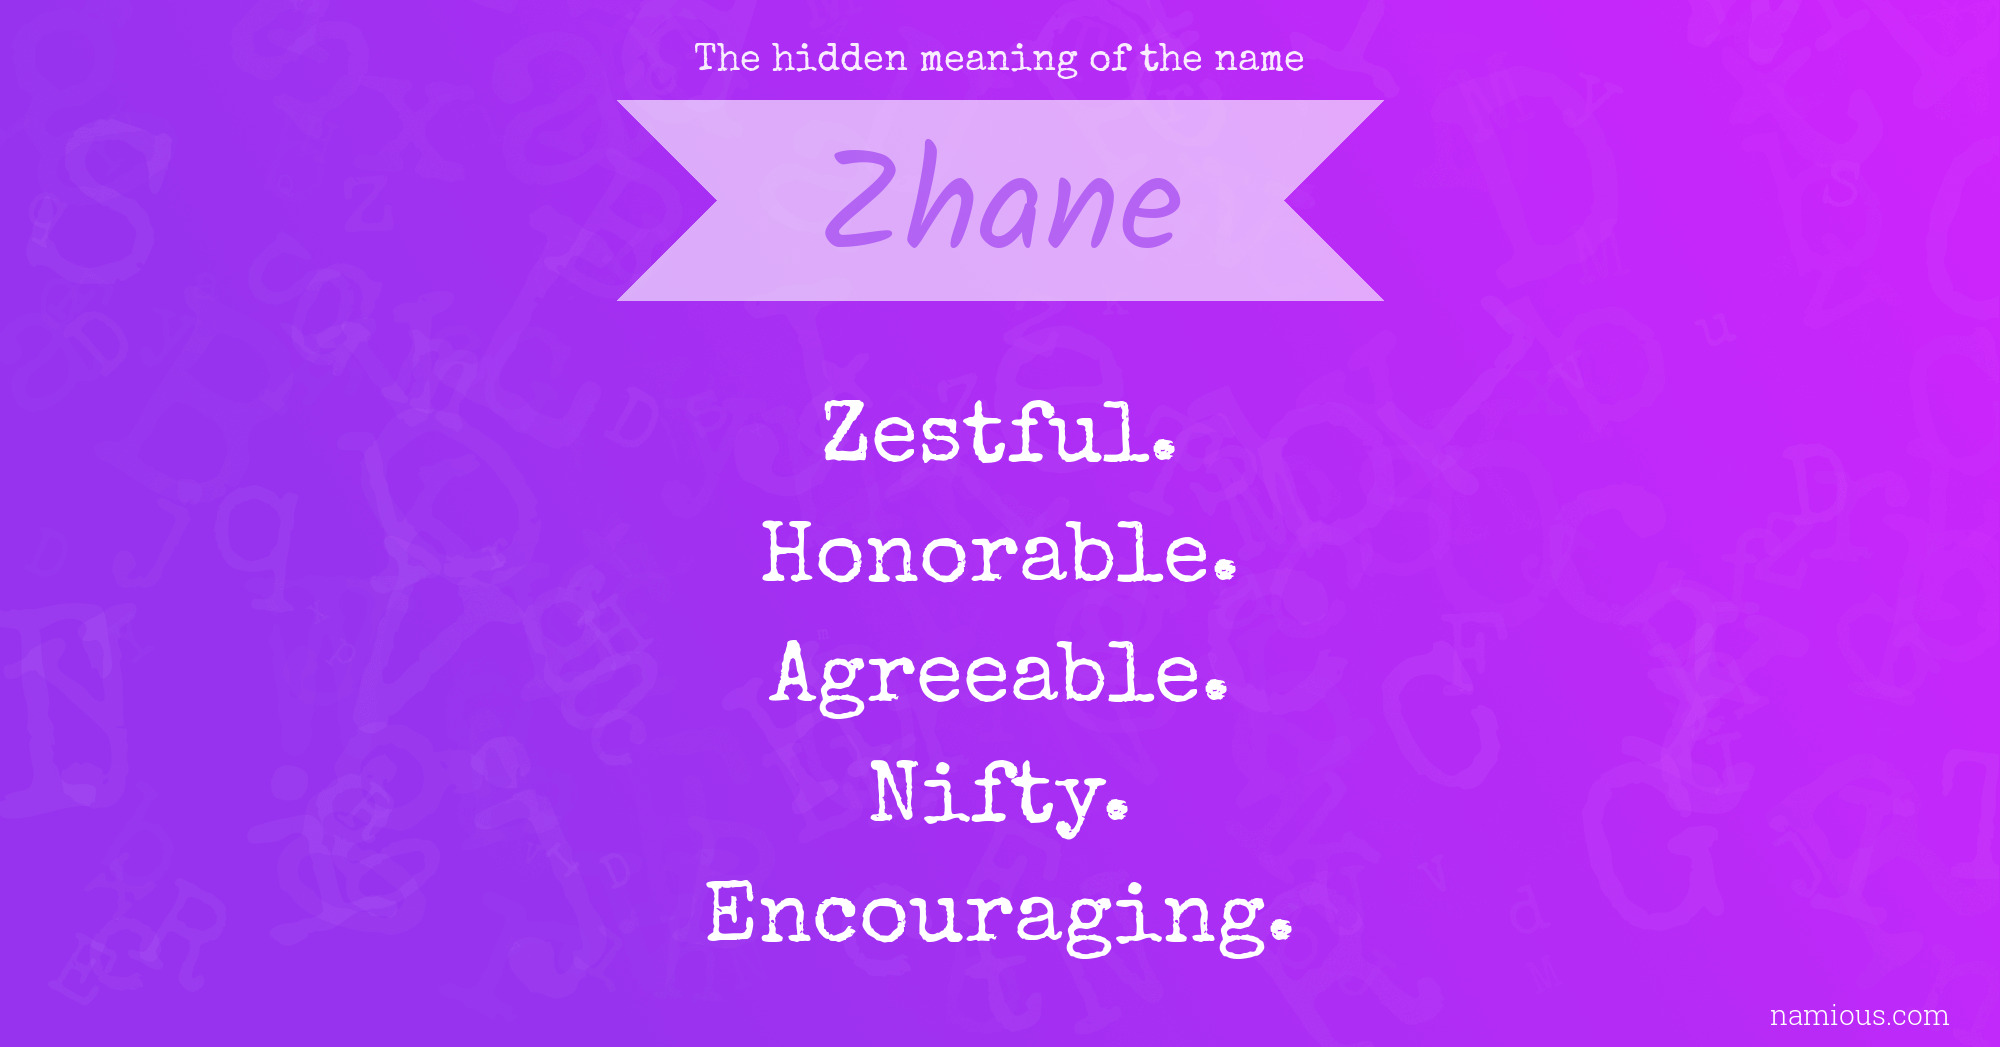 The hidden meaning of the name Zhane